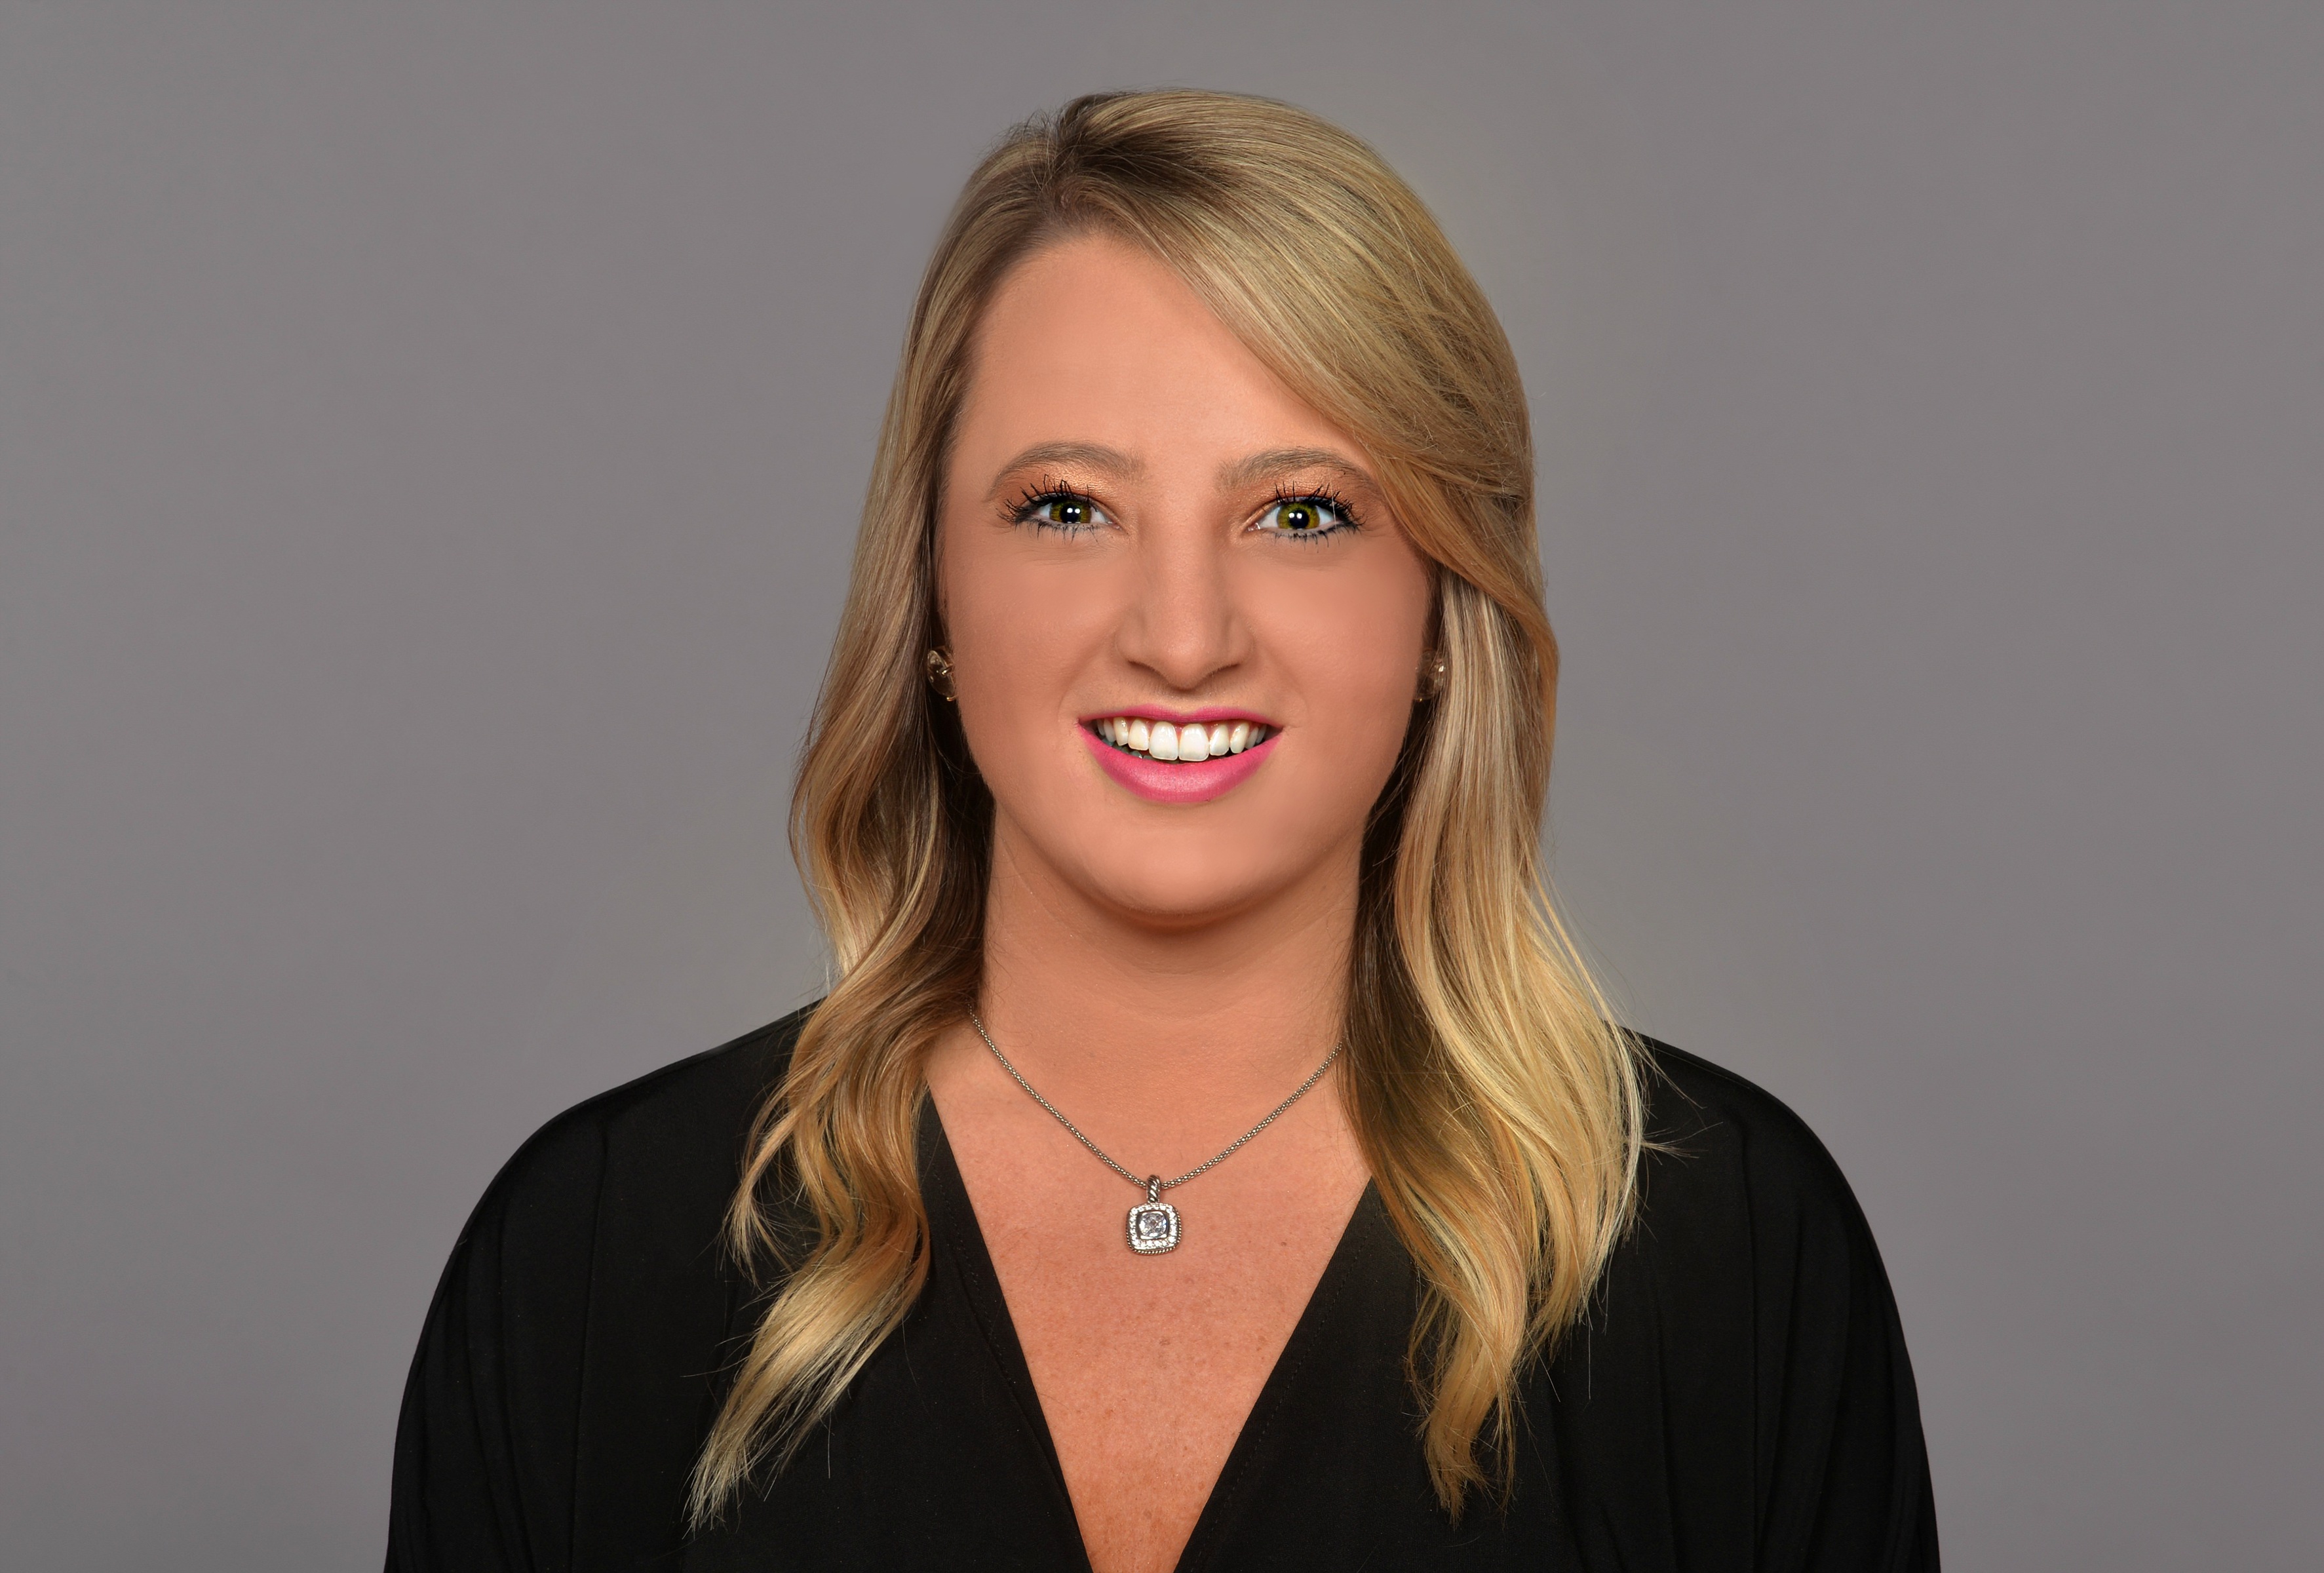 Get My Job with Savanna Wood, Manager of Digital Marketing for the Jacksonville Jaguars